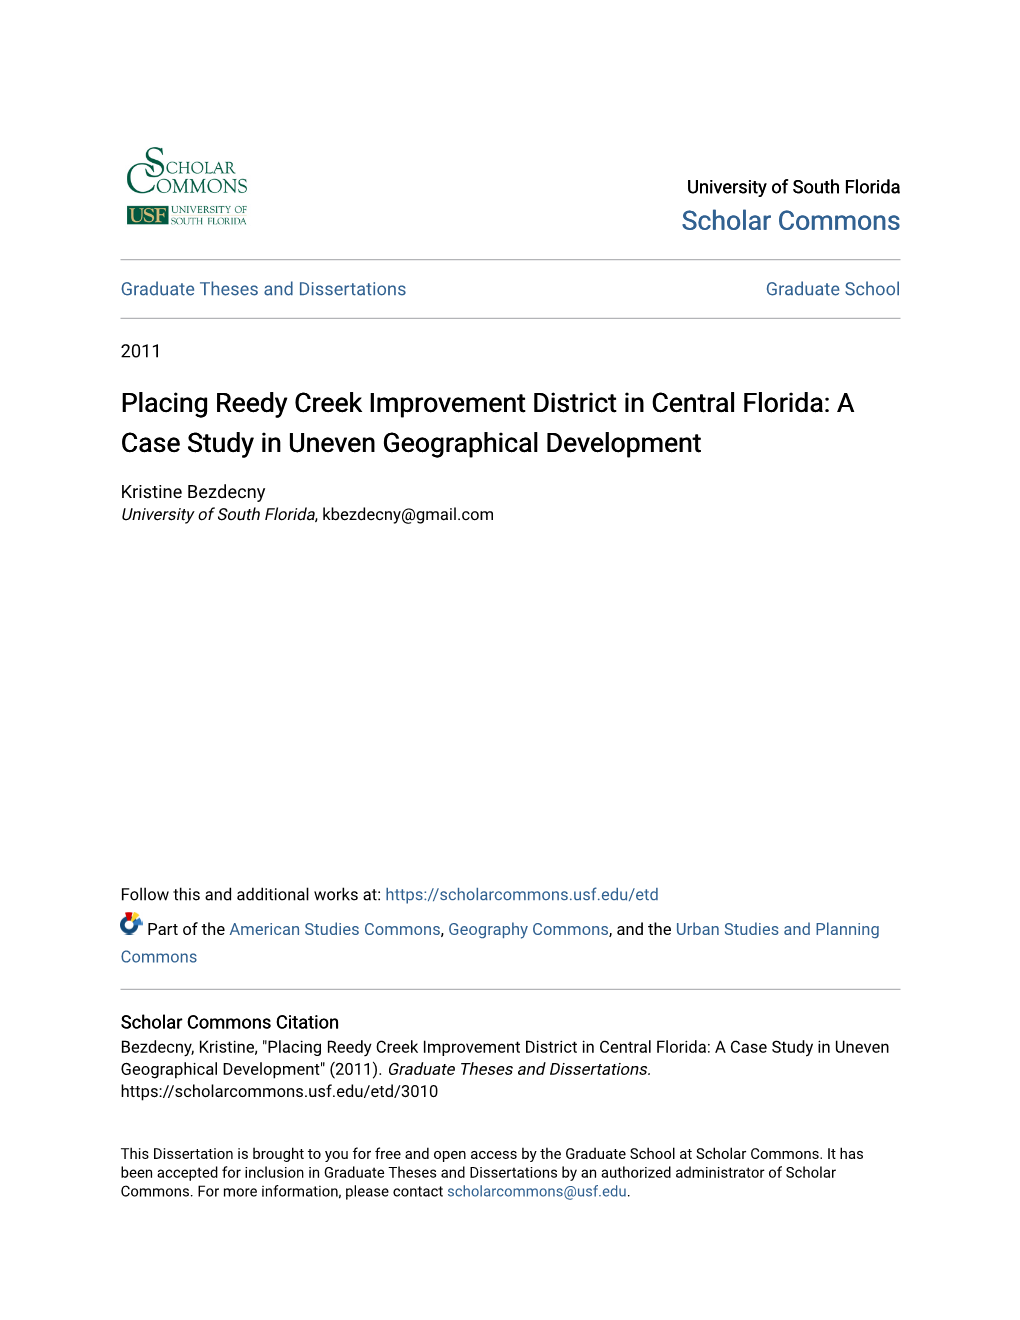 Placing Reedy Creek Improvement District in Central Florida: a Case Study in Uneven Geographical Development